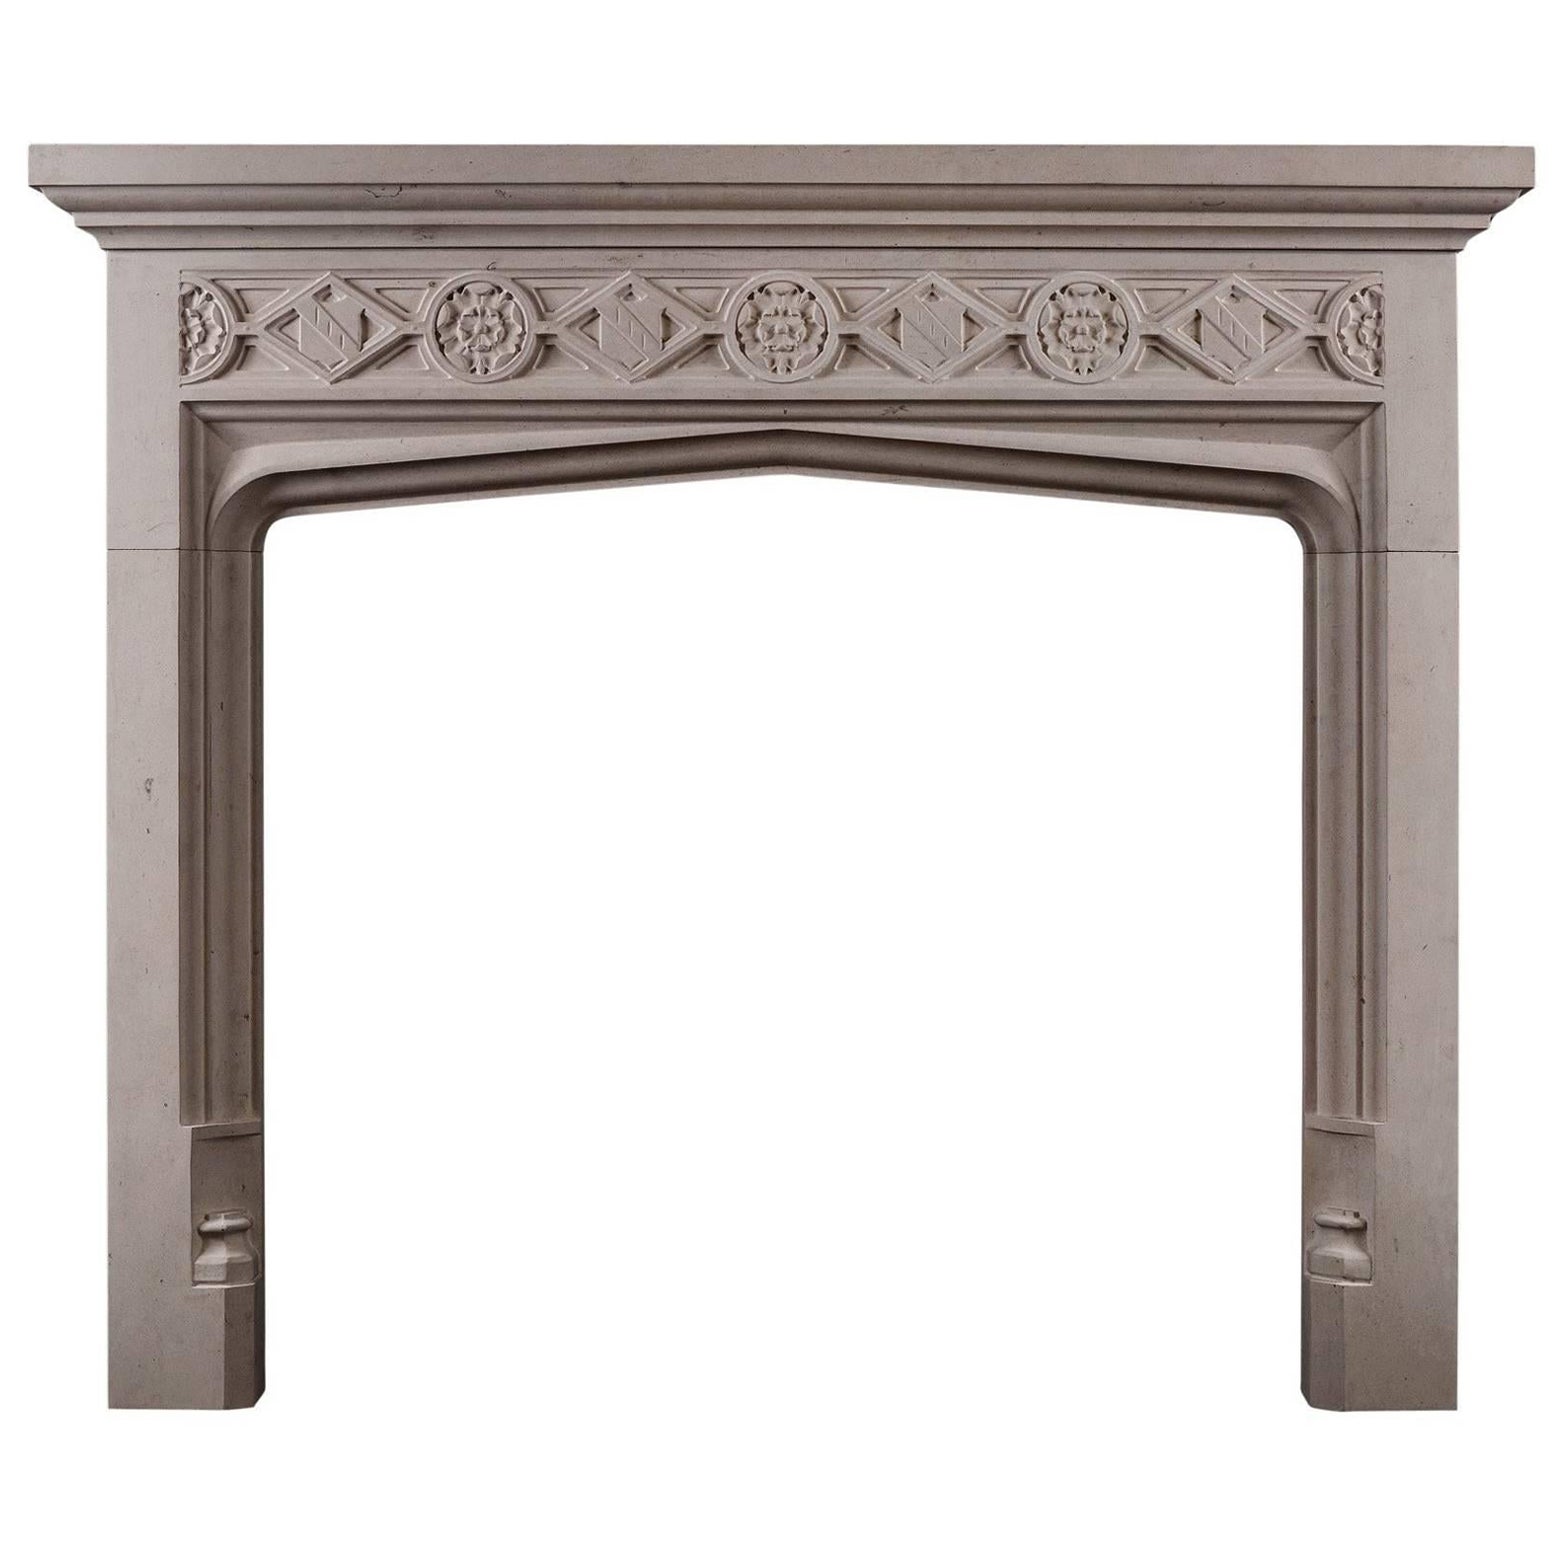 Gothic Style Limestone Fireplace For Sale